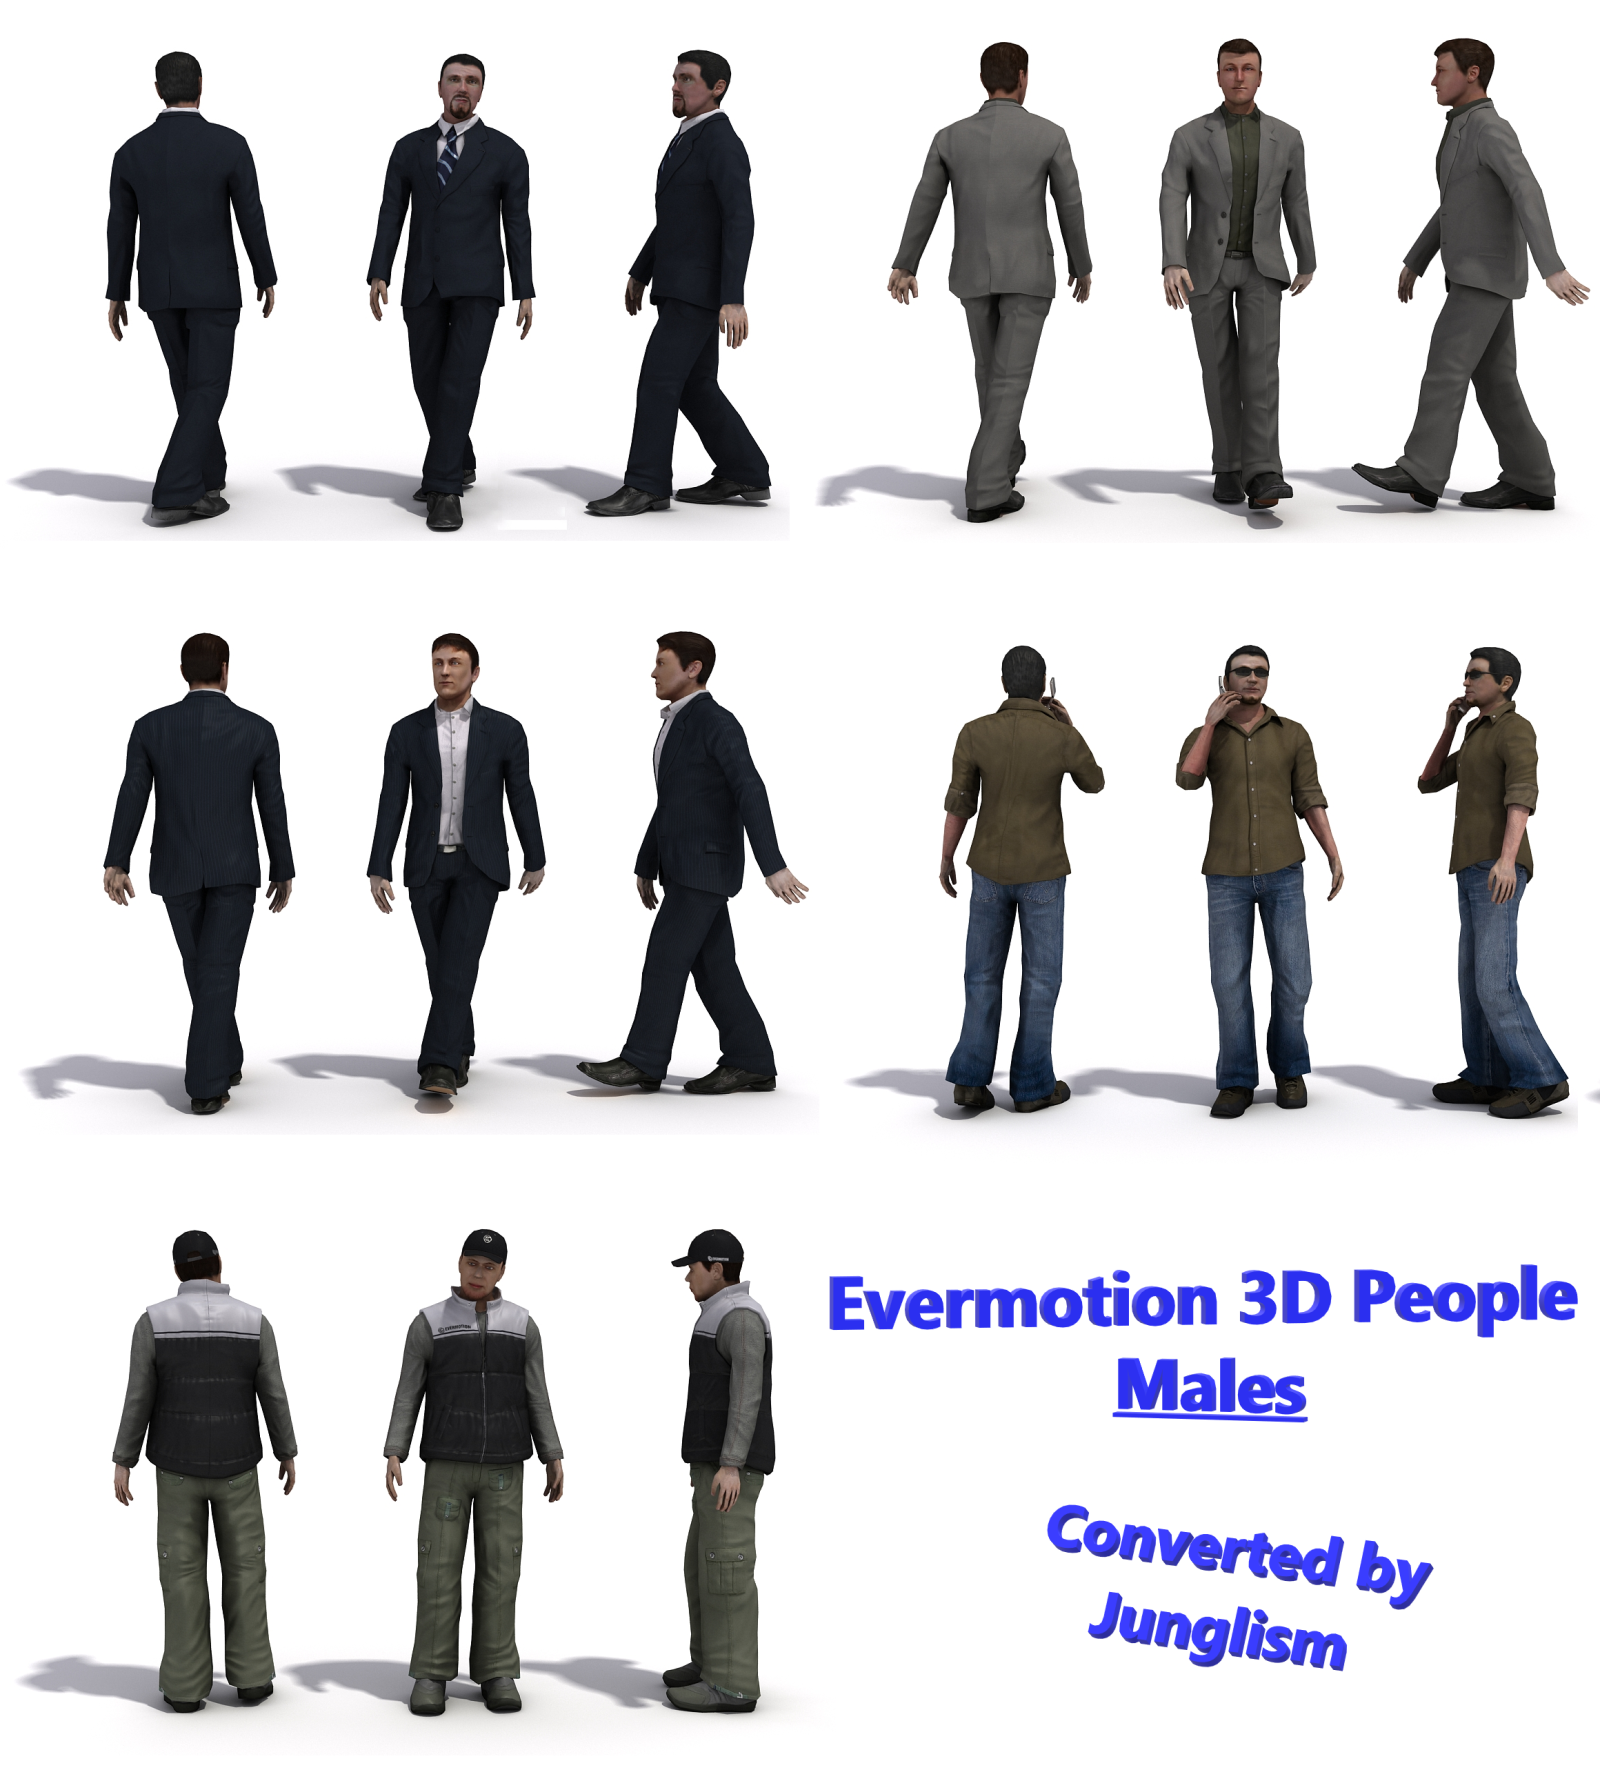 Evermotion 3D People Males by Junglism small 1710524740